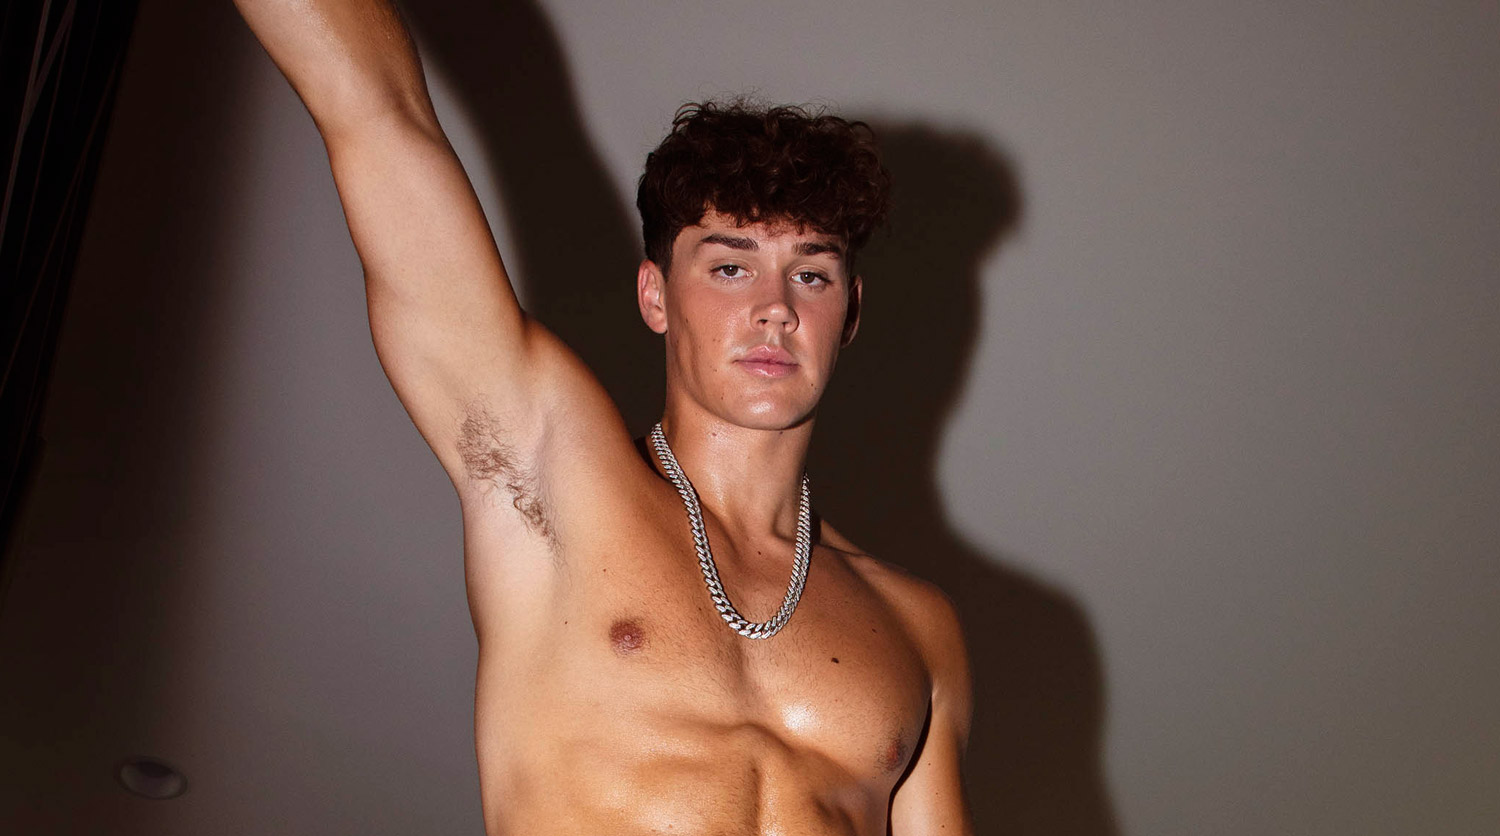 TikTok Star Noah Beck Shows Off His Physique for ‘Mood,’...